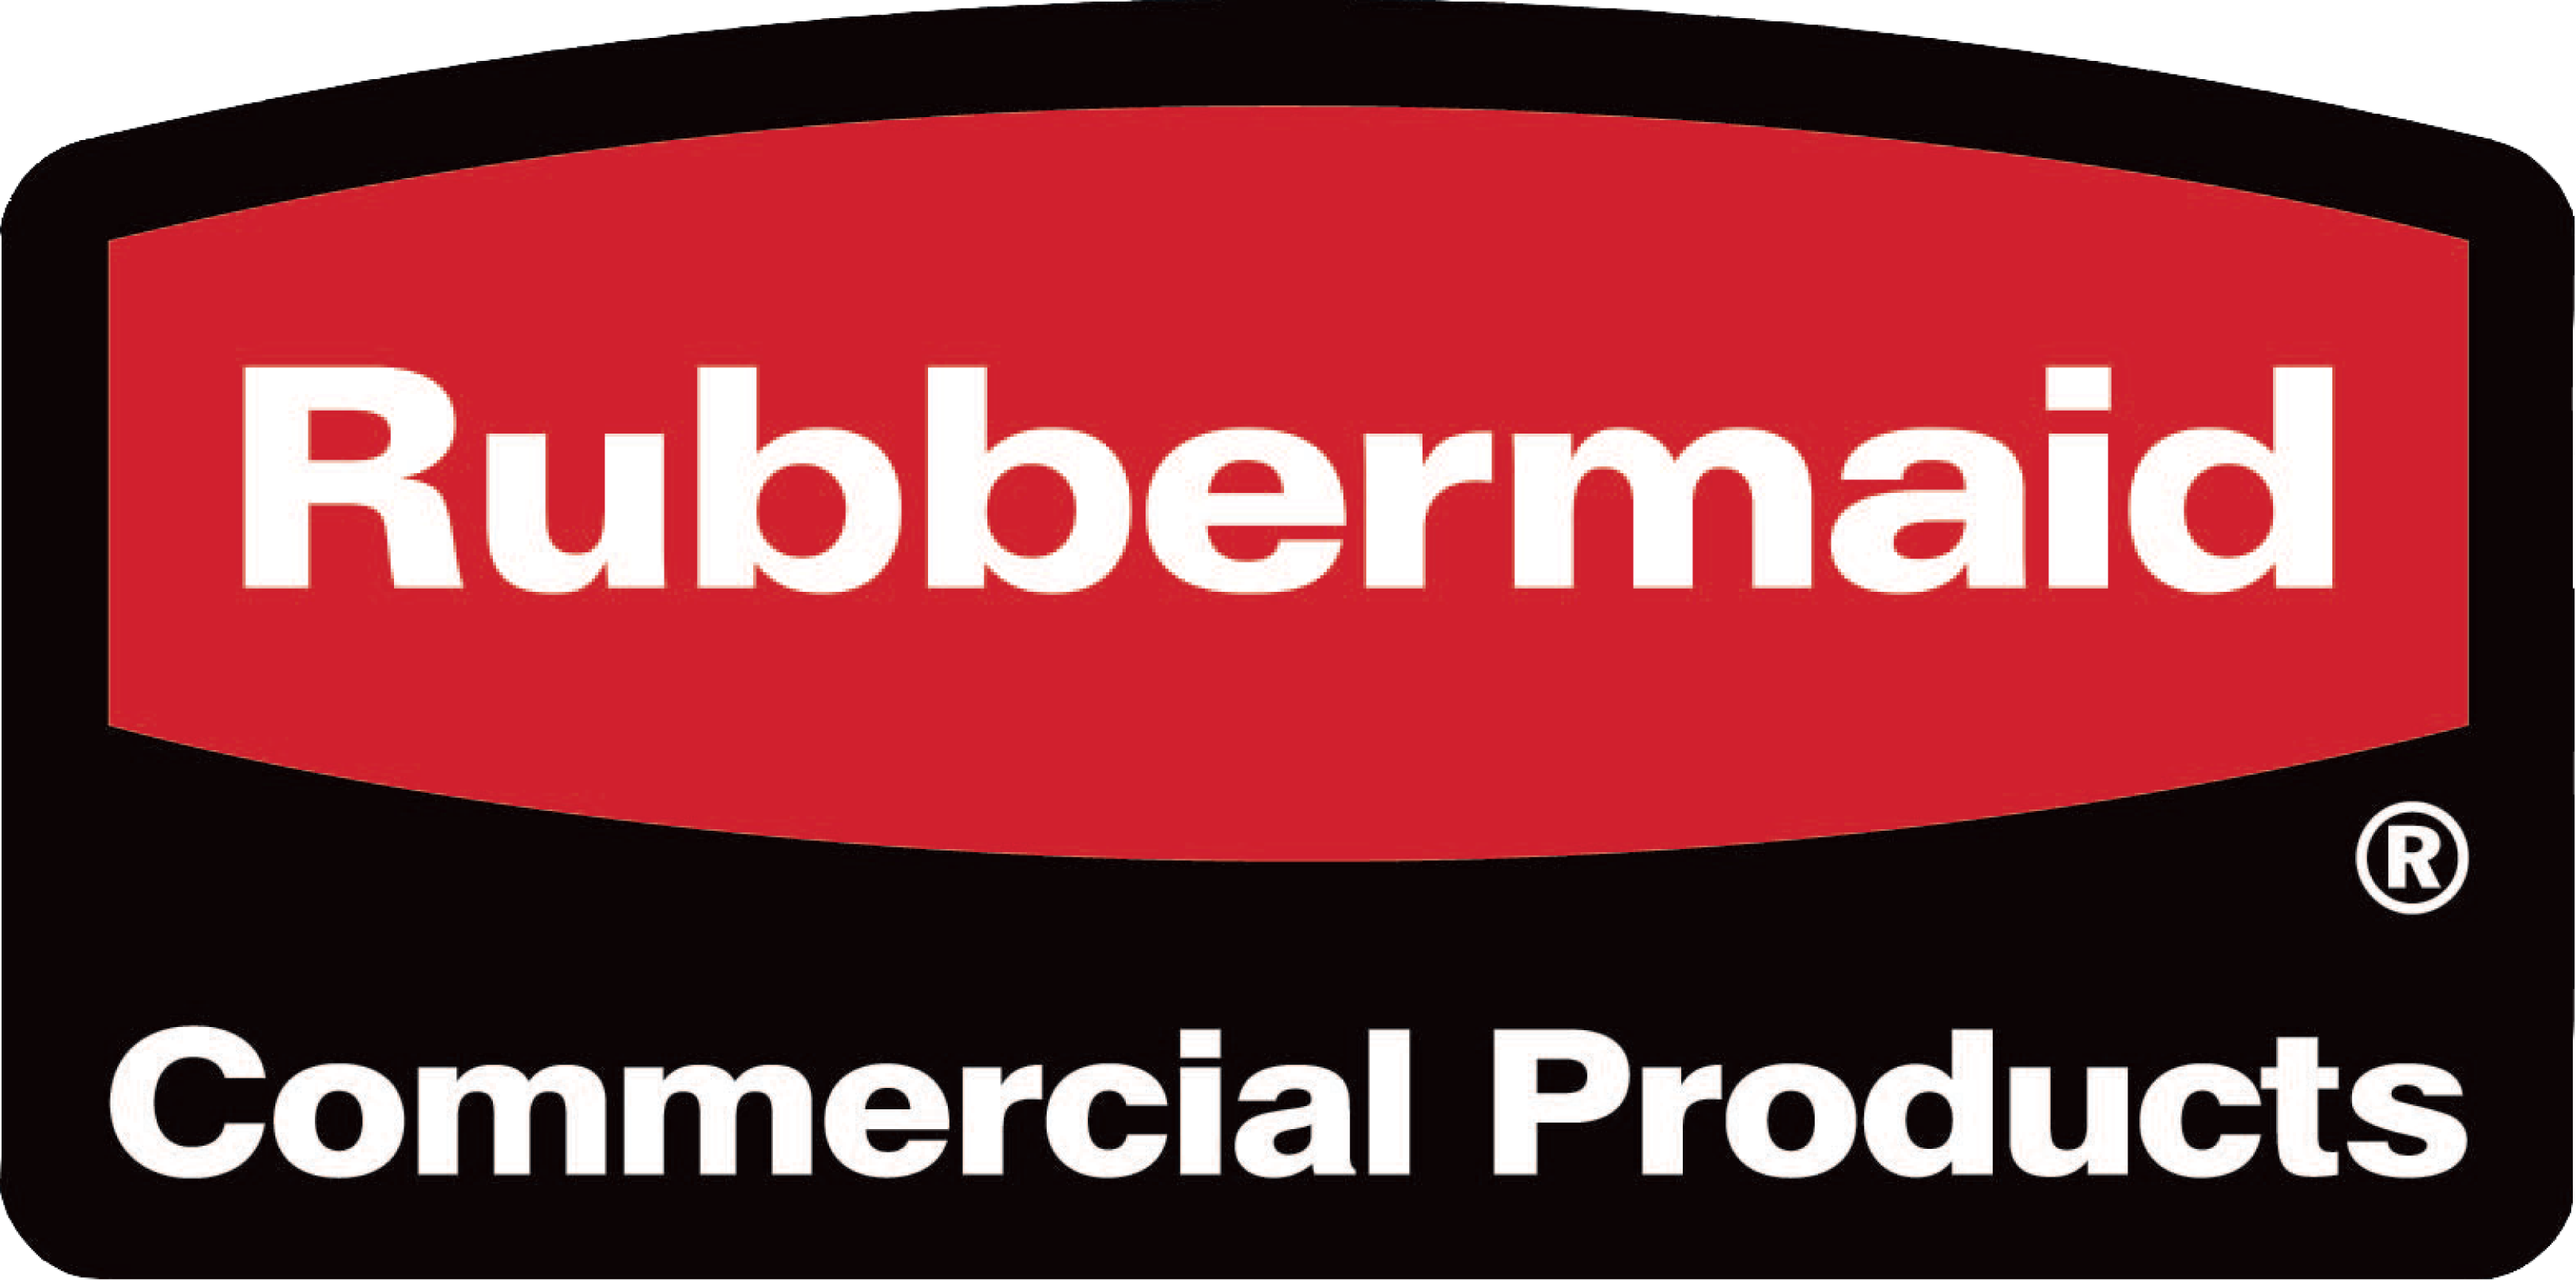 New Innovations - Rubbermaid Commercial